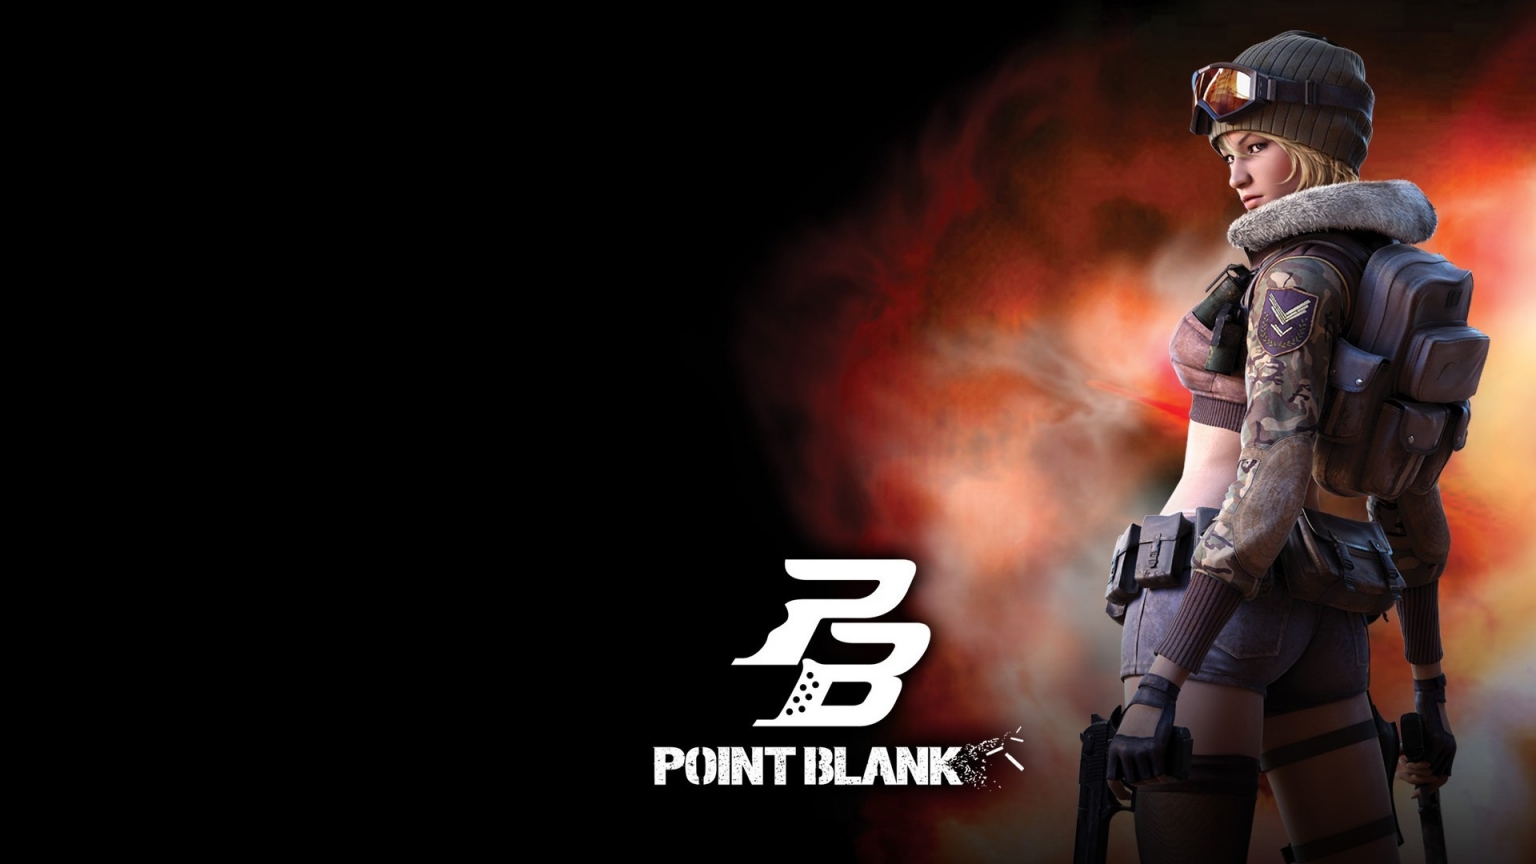 Point Blank Poster for 1536 x 864 HDTV resolution